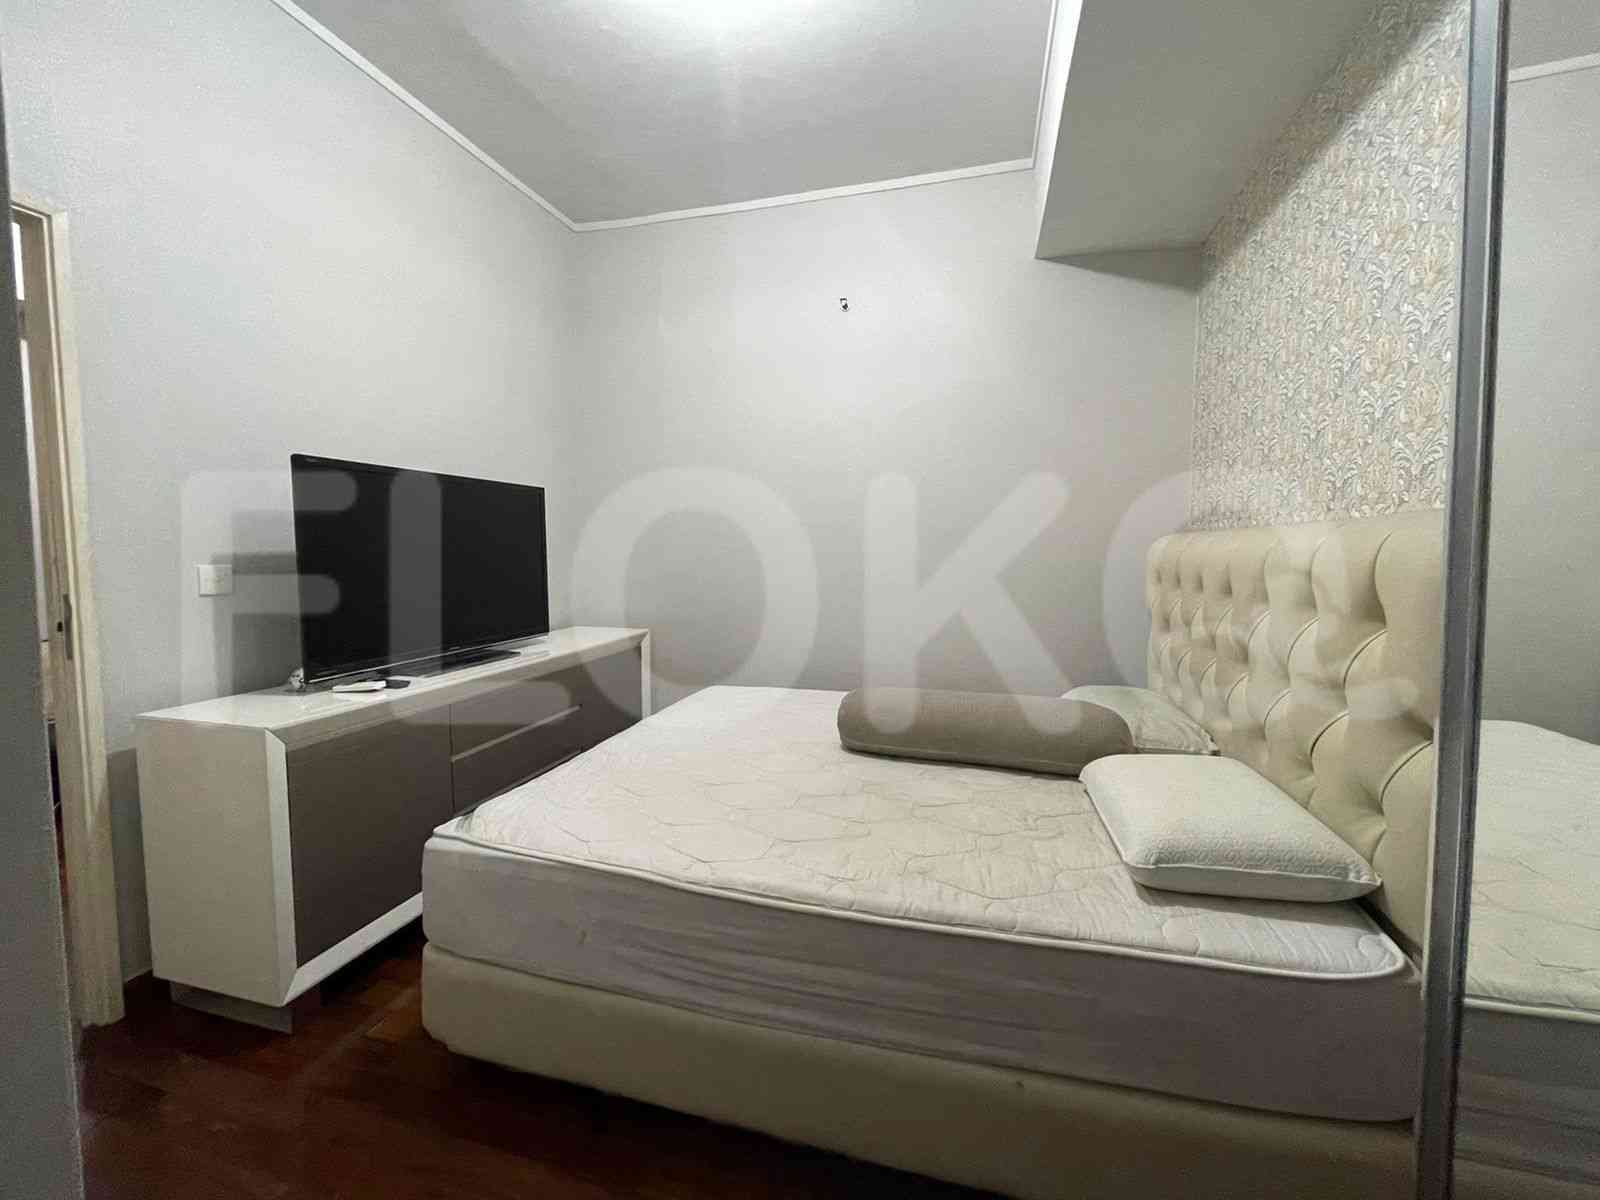 2 Bedroom on 18th Floor for Rent in Seasons City Apartment - fgr682 8